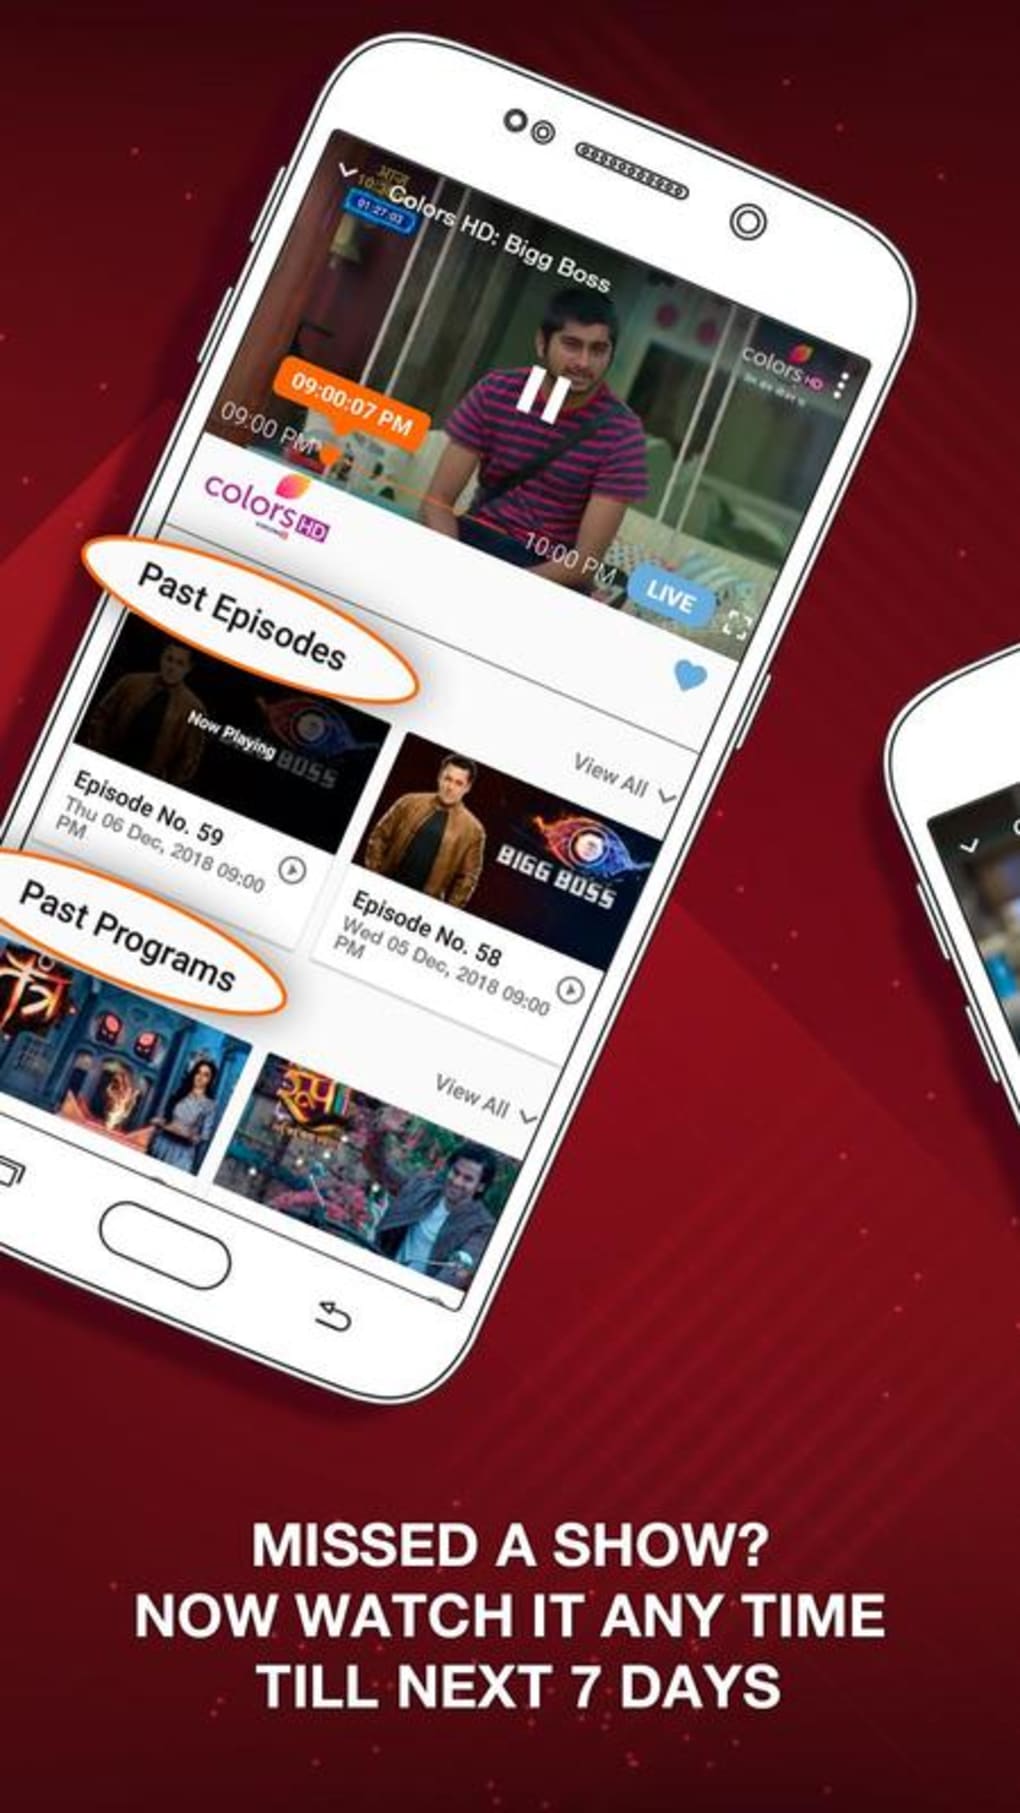 Indian Tv Channels Live Streaming software, free download For Android